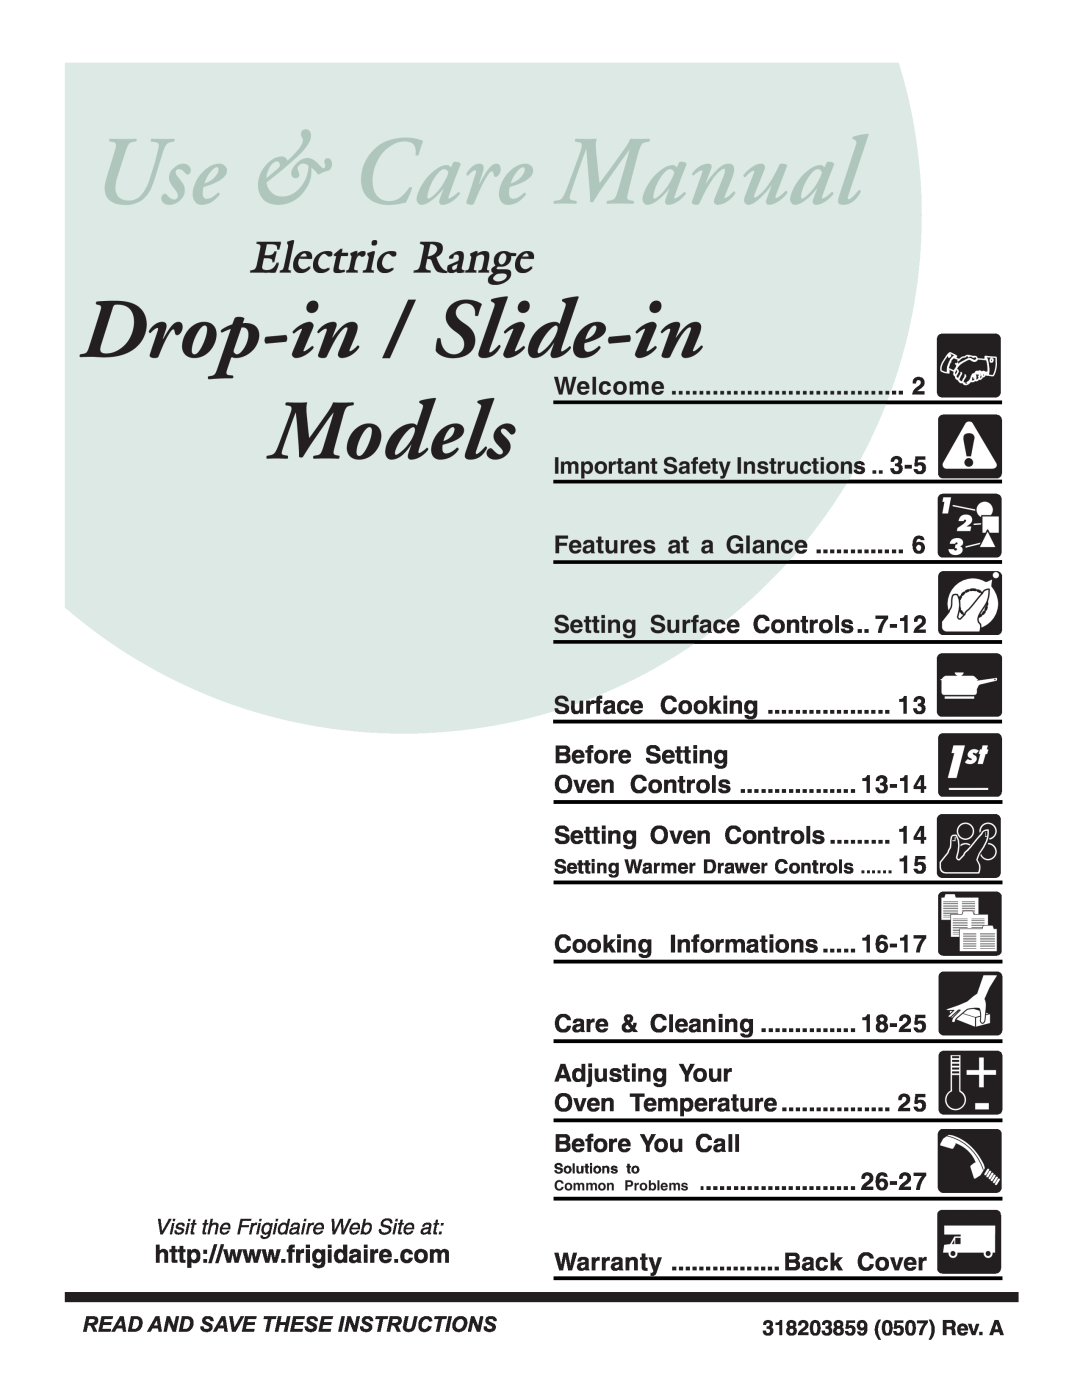 Electrolux Drop-in manual Welcome, 7-12, Before Setting, Oven Controls, 13-14, Cooking, 16-17, Care & Cleaning, 18-25 